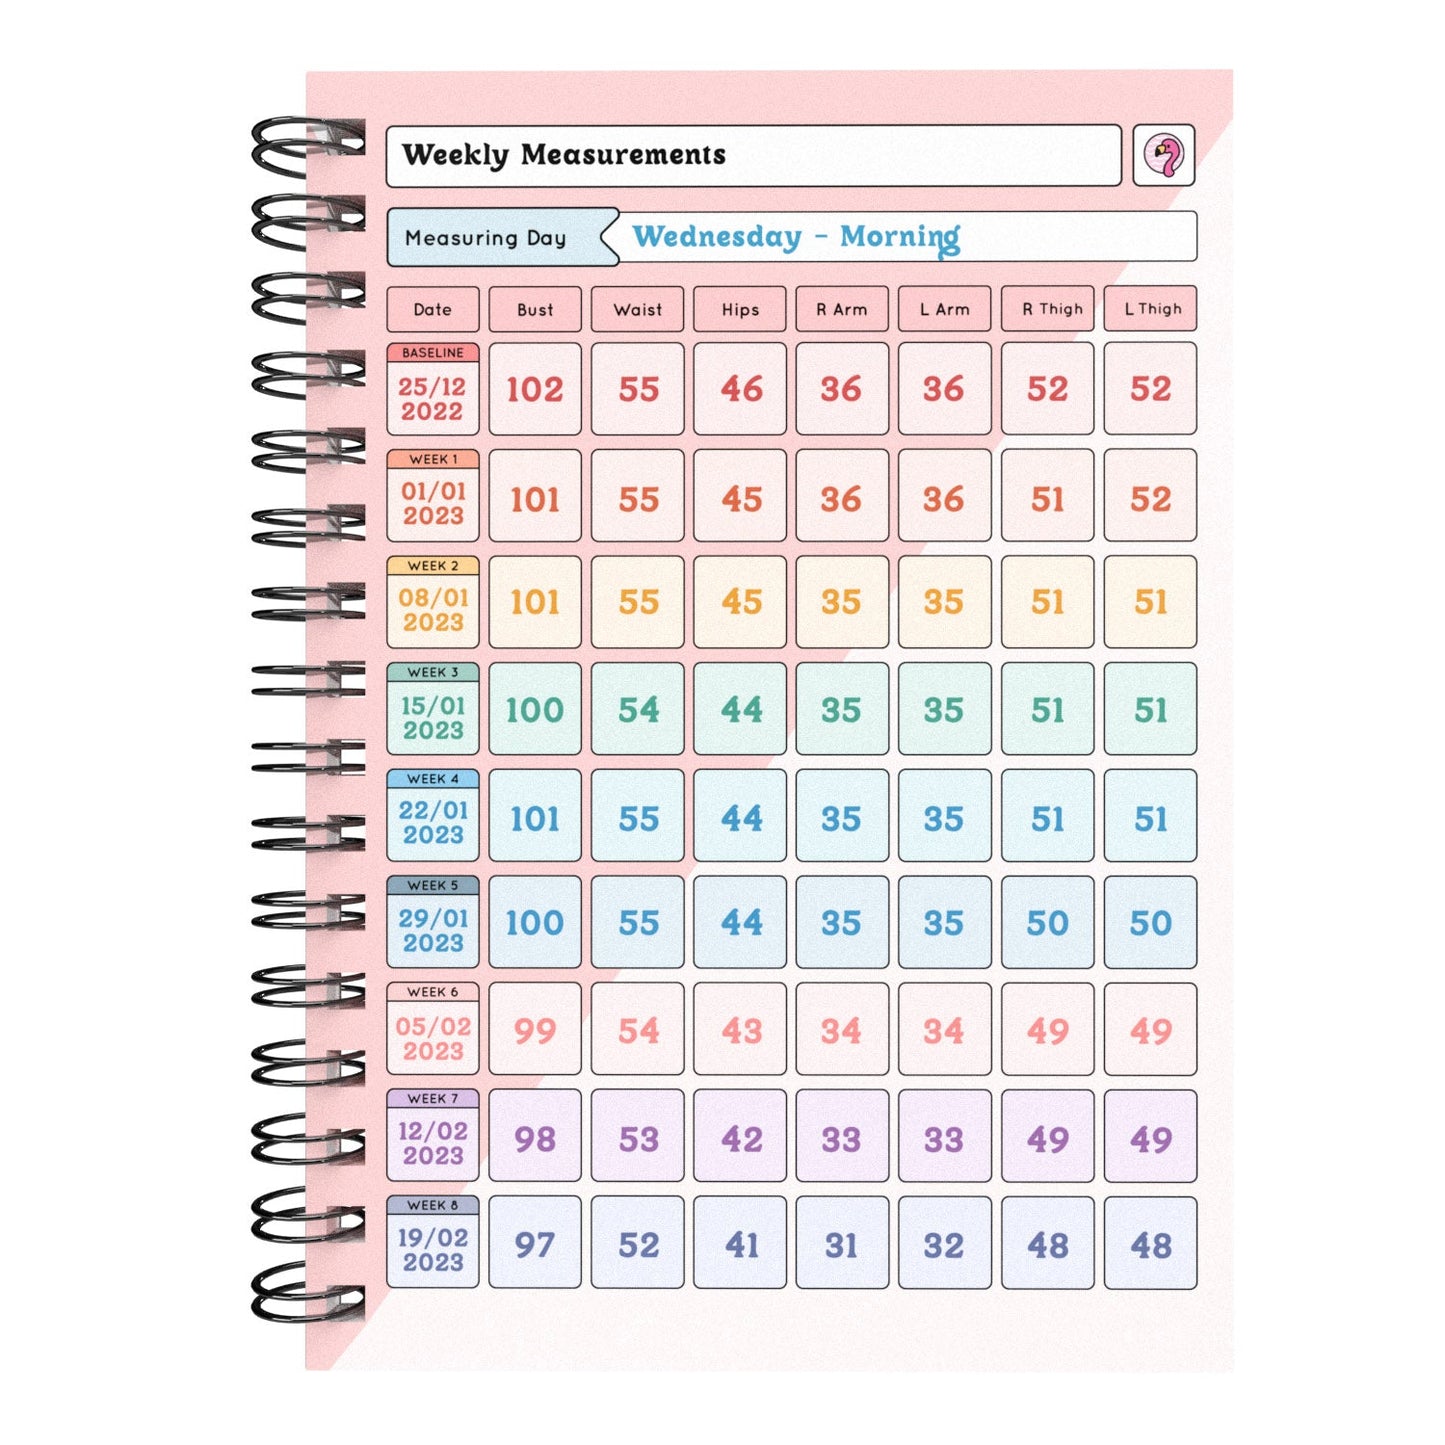 Food Diary - C64 - Calorie Counting - Fabulous Planning - [W] 3MTH - CAL - C64+